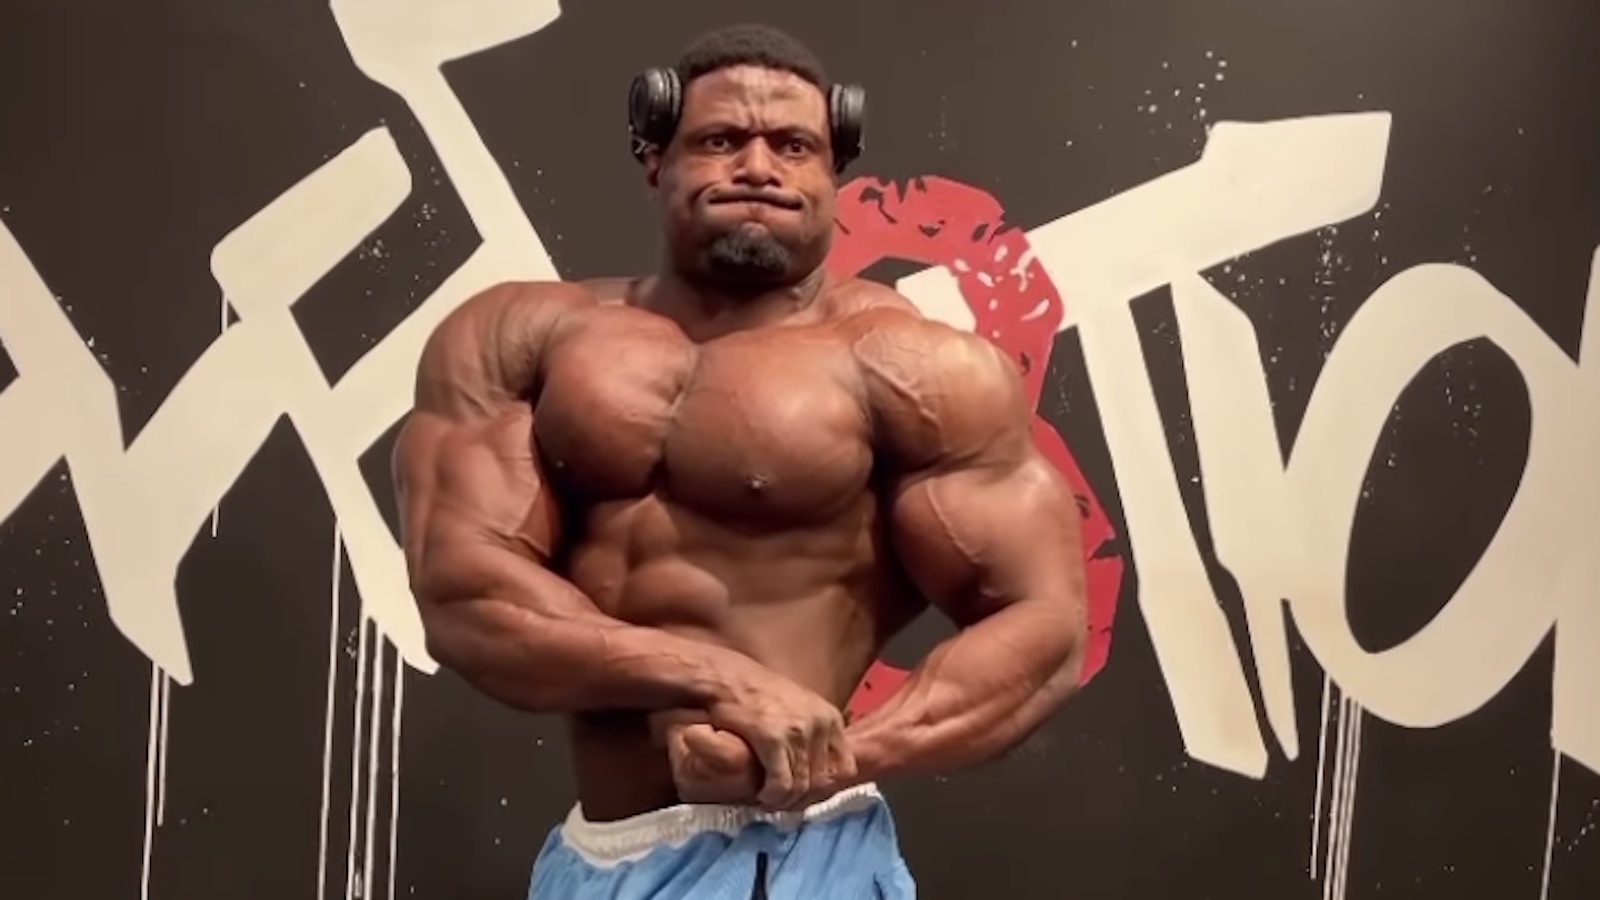 Andrew Jacked’s Trainer Thinks His “Best” Will Come at 2023 Arnold Classic